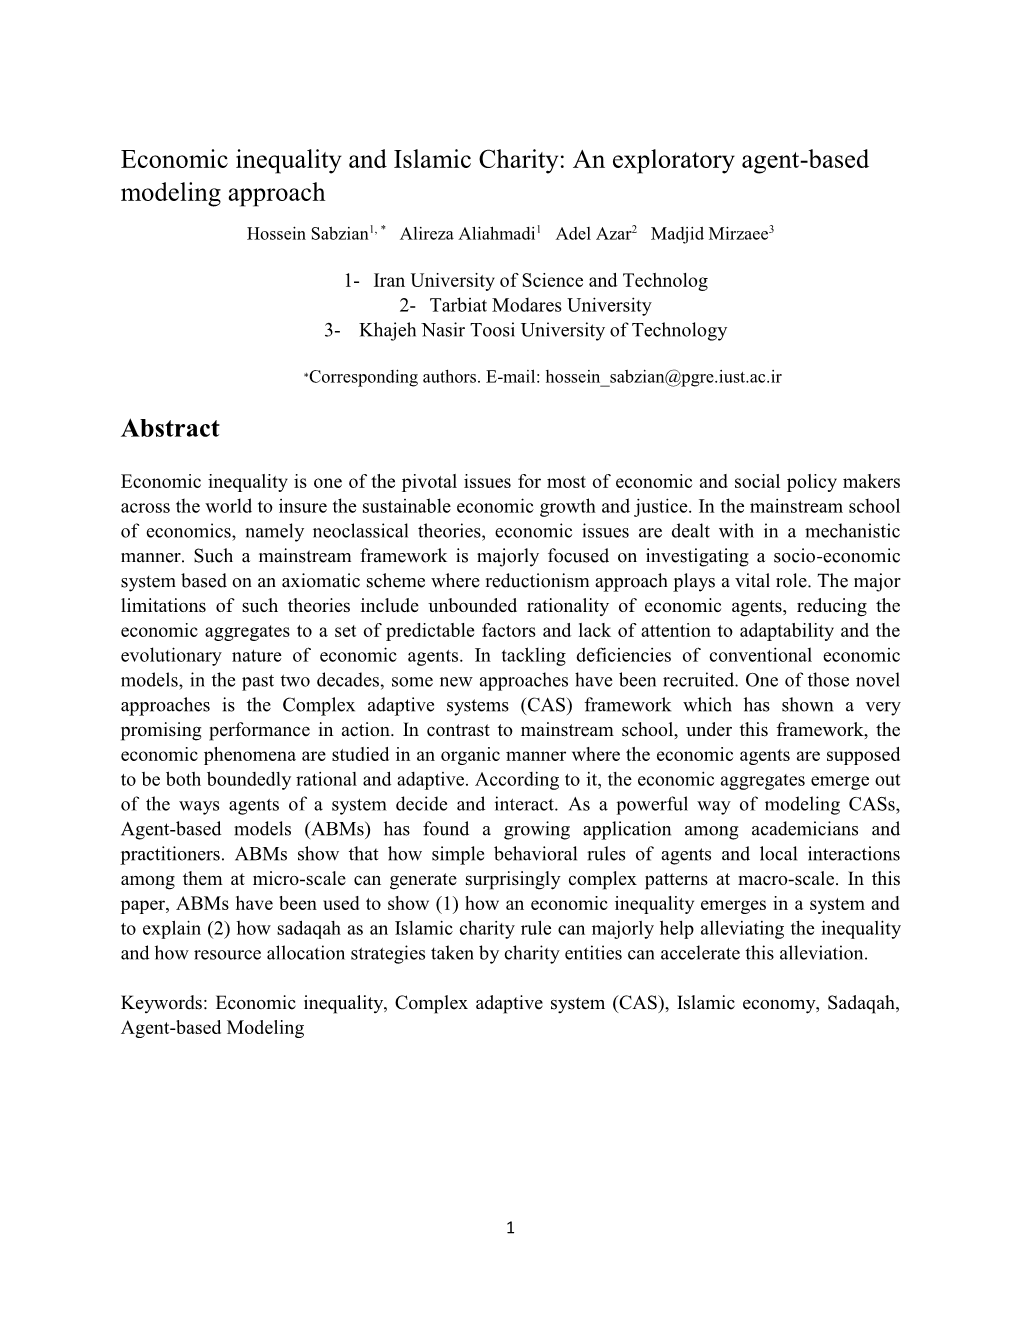 Economic Inequality and Islamic Charity: an Exploratory Agent-Based Modeling Approach